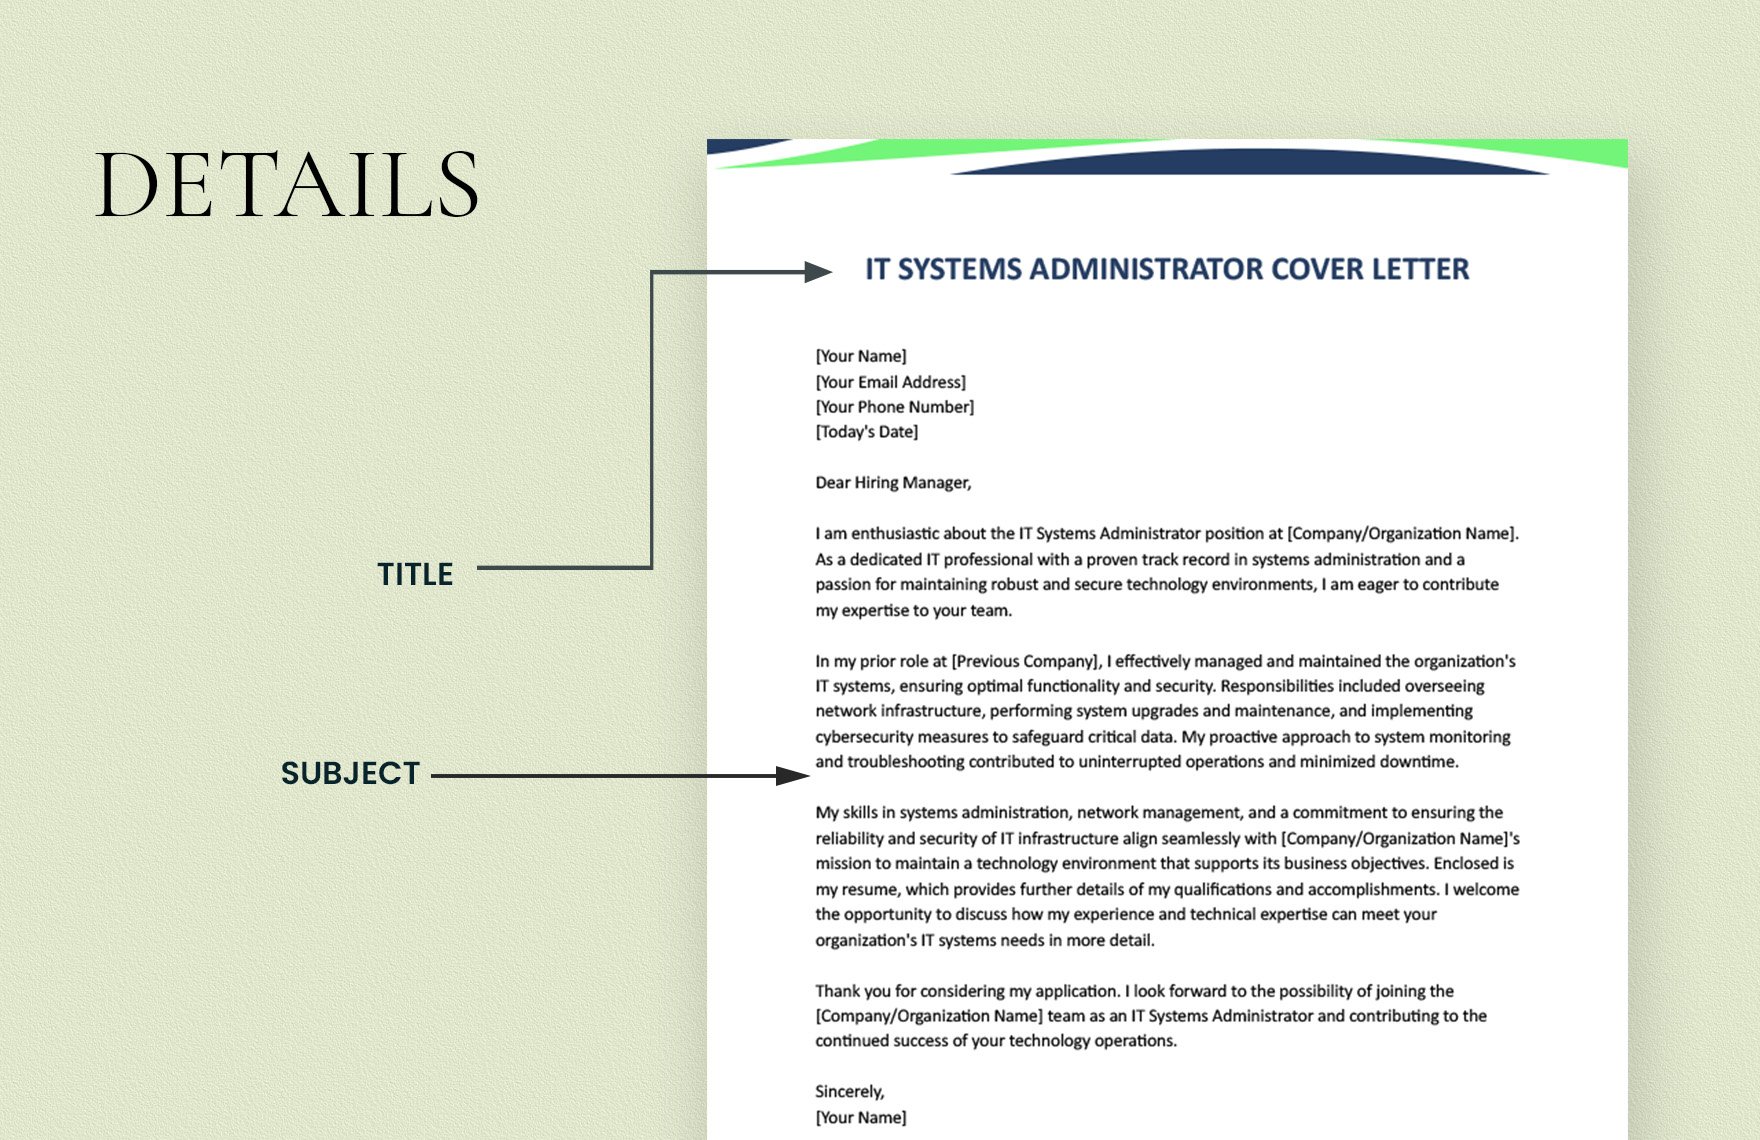 IT Systems Administrator Cover Letter